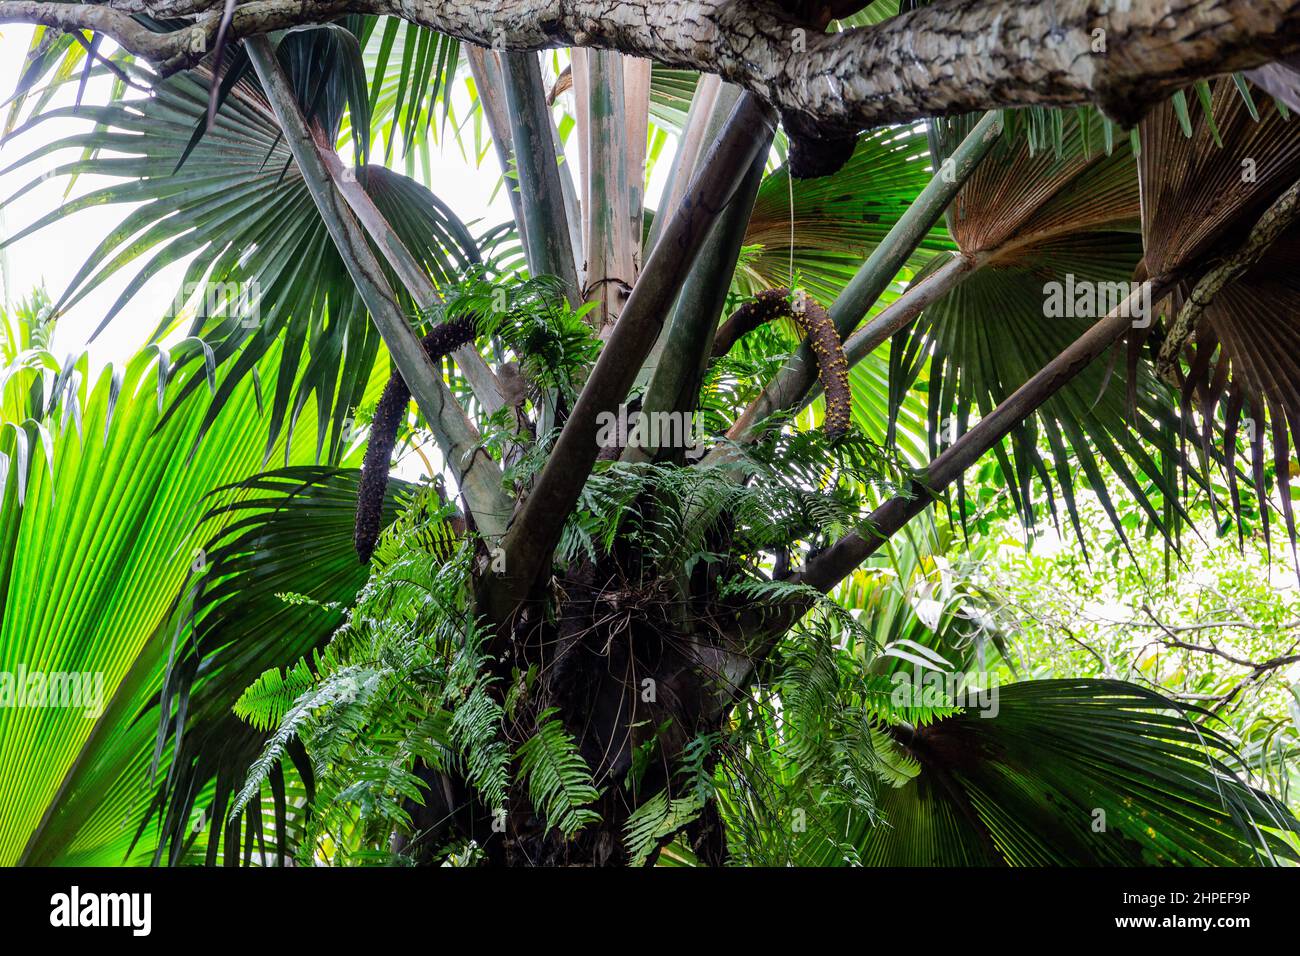 Male inflorescence fruit clusters of  Coco de mer (Lodoicea maldivica) with large palm leaves around, endemic species to Praslin Island, Vallee de Mai Stock Photo